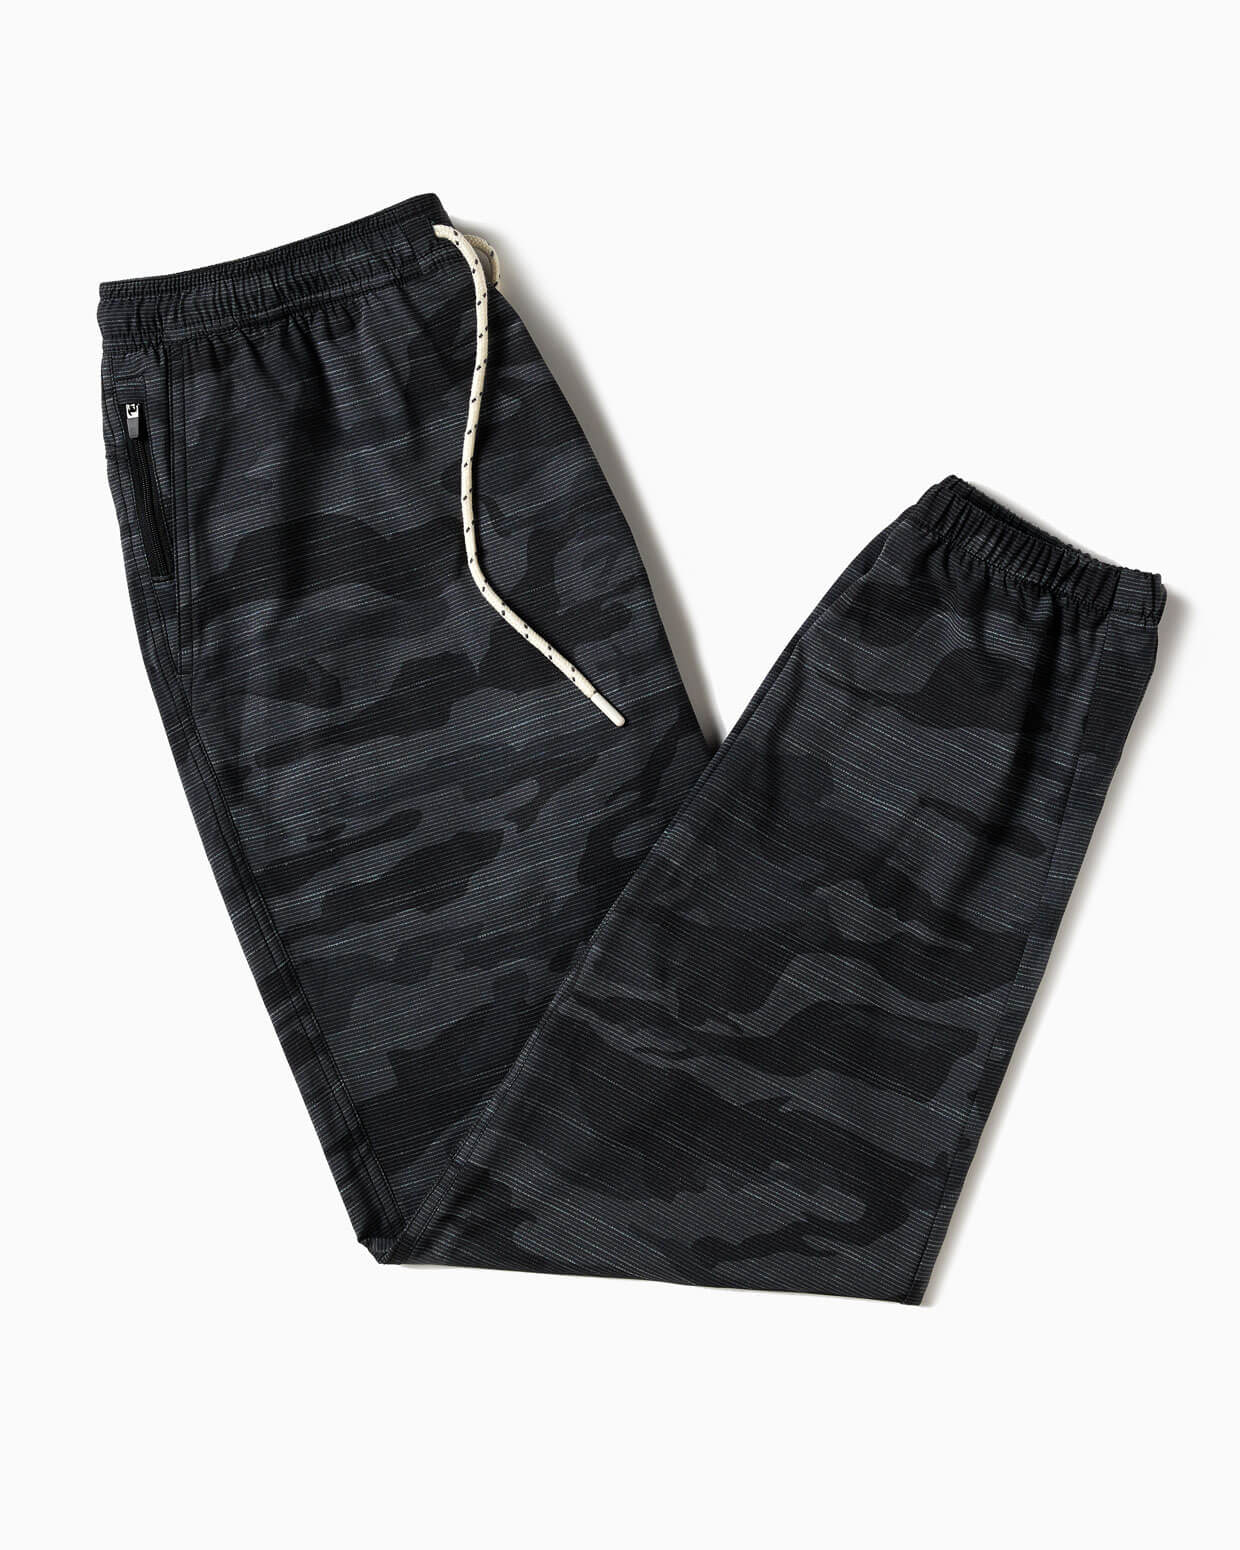 Offshore | Performance Jogger